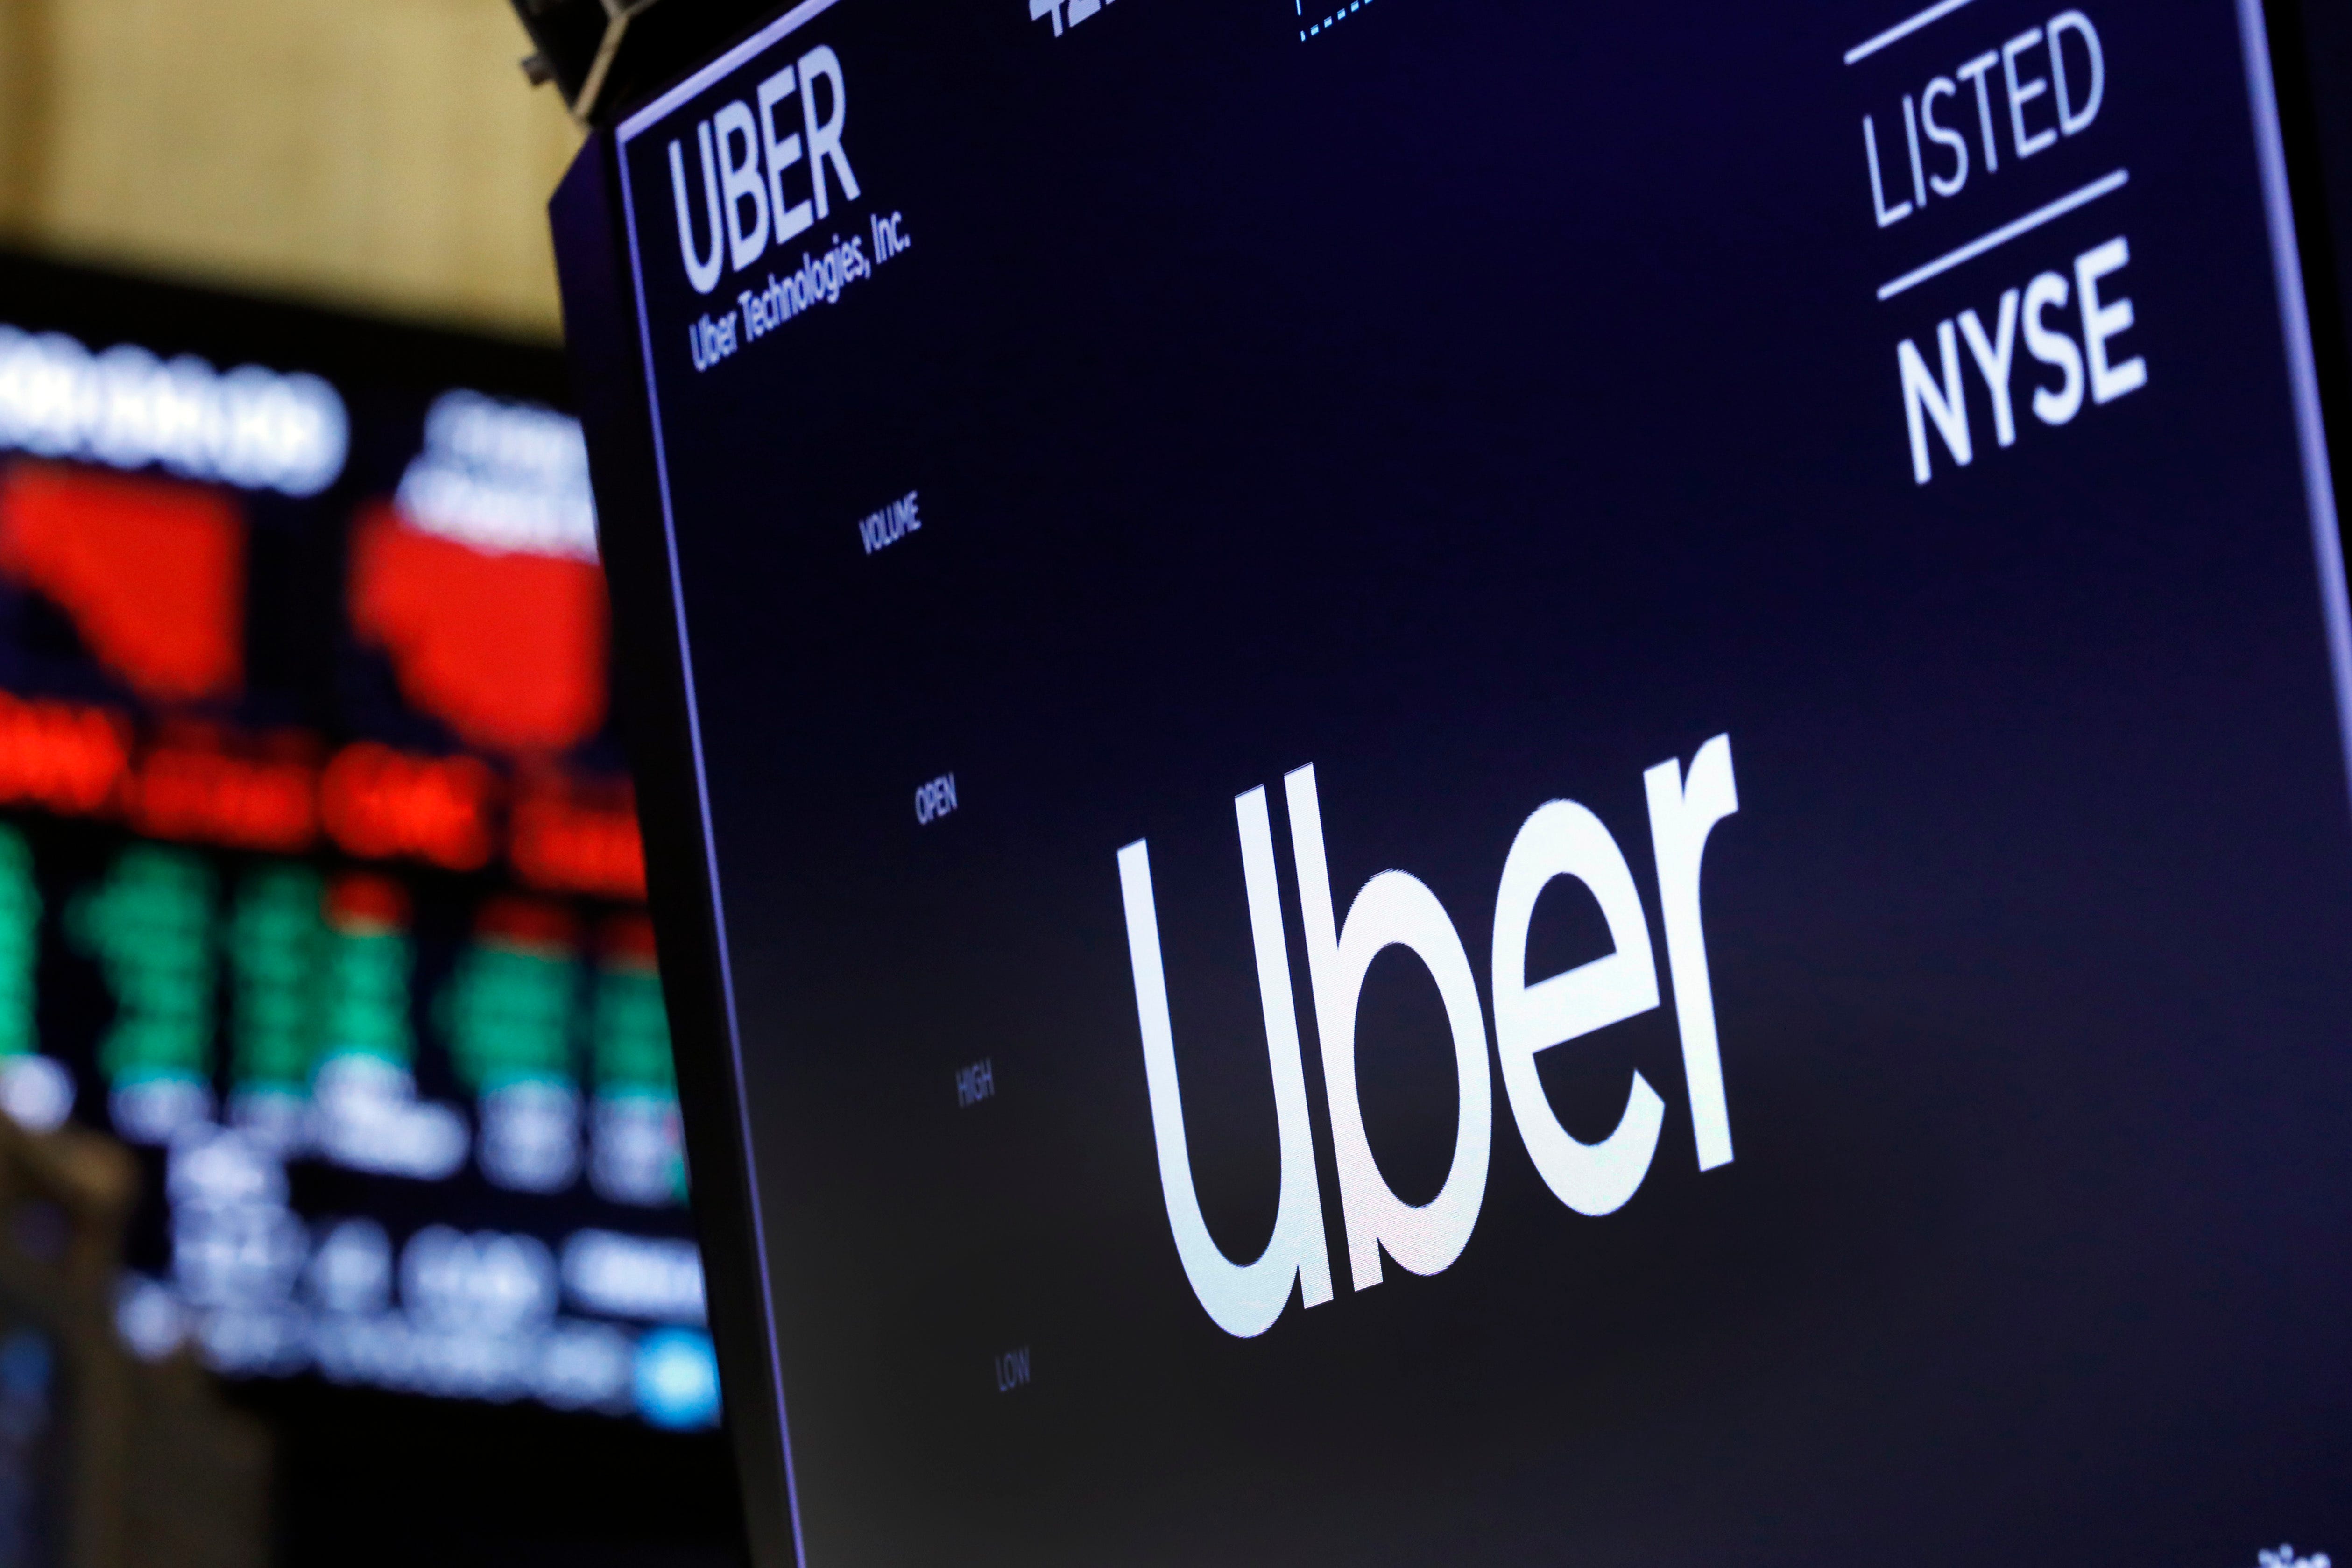 Uber lays off 435 employees, after record $5.2 billion quarterly loss.